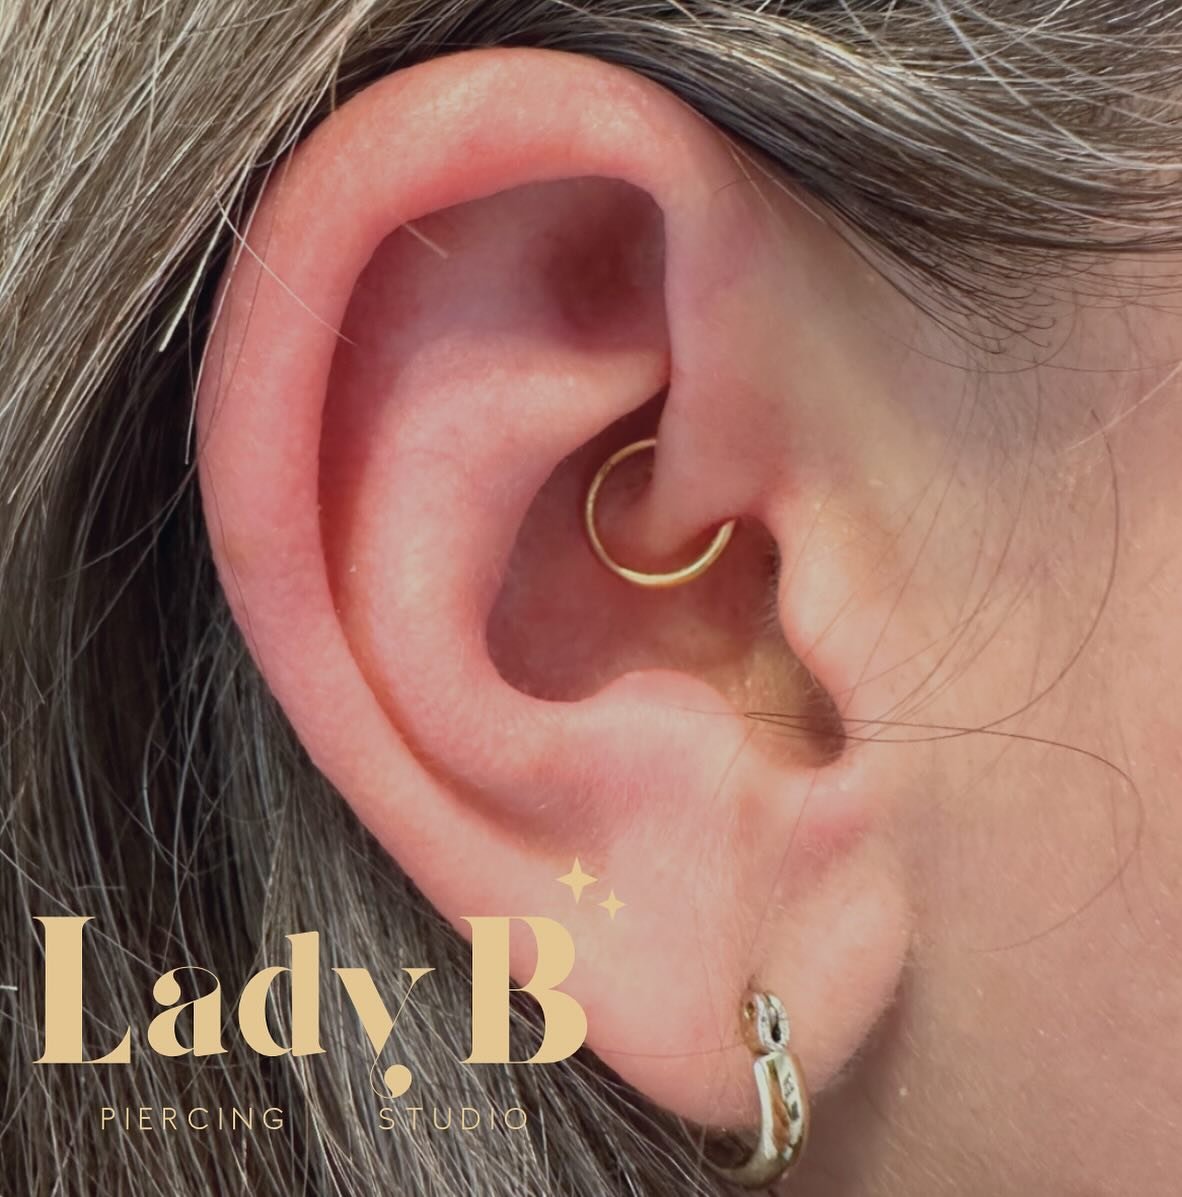 Classic little daith piercing for this client ✨
Done by Elaine at @ladybpiercings